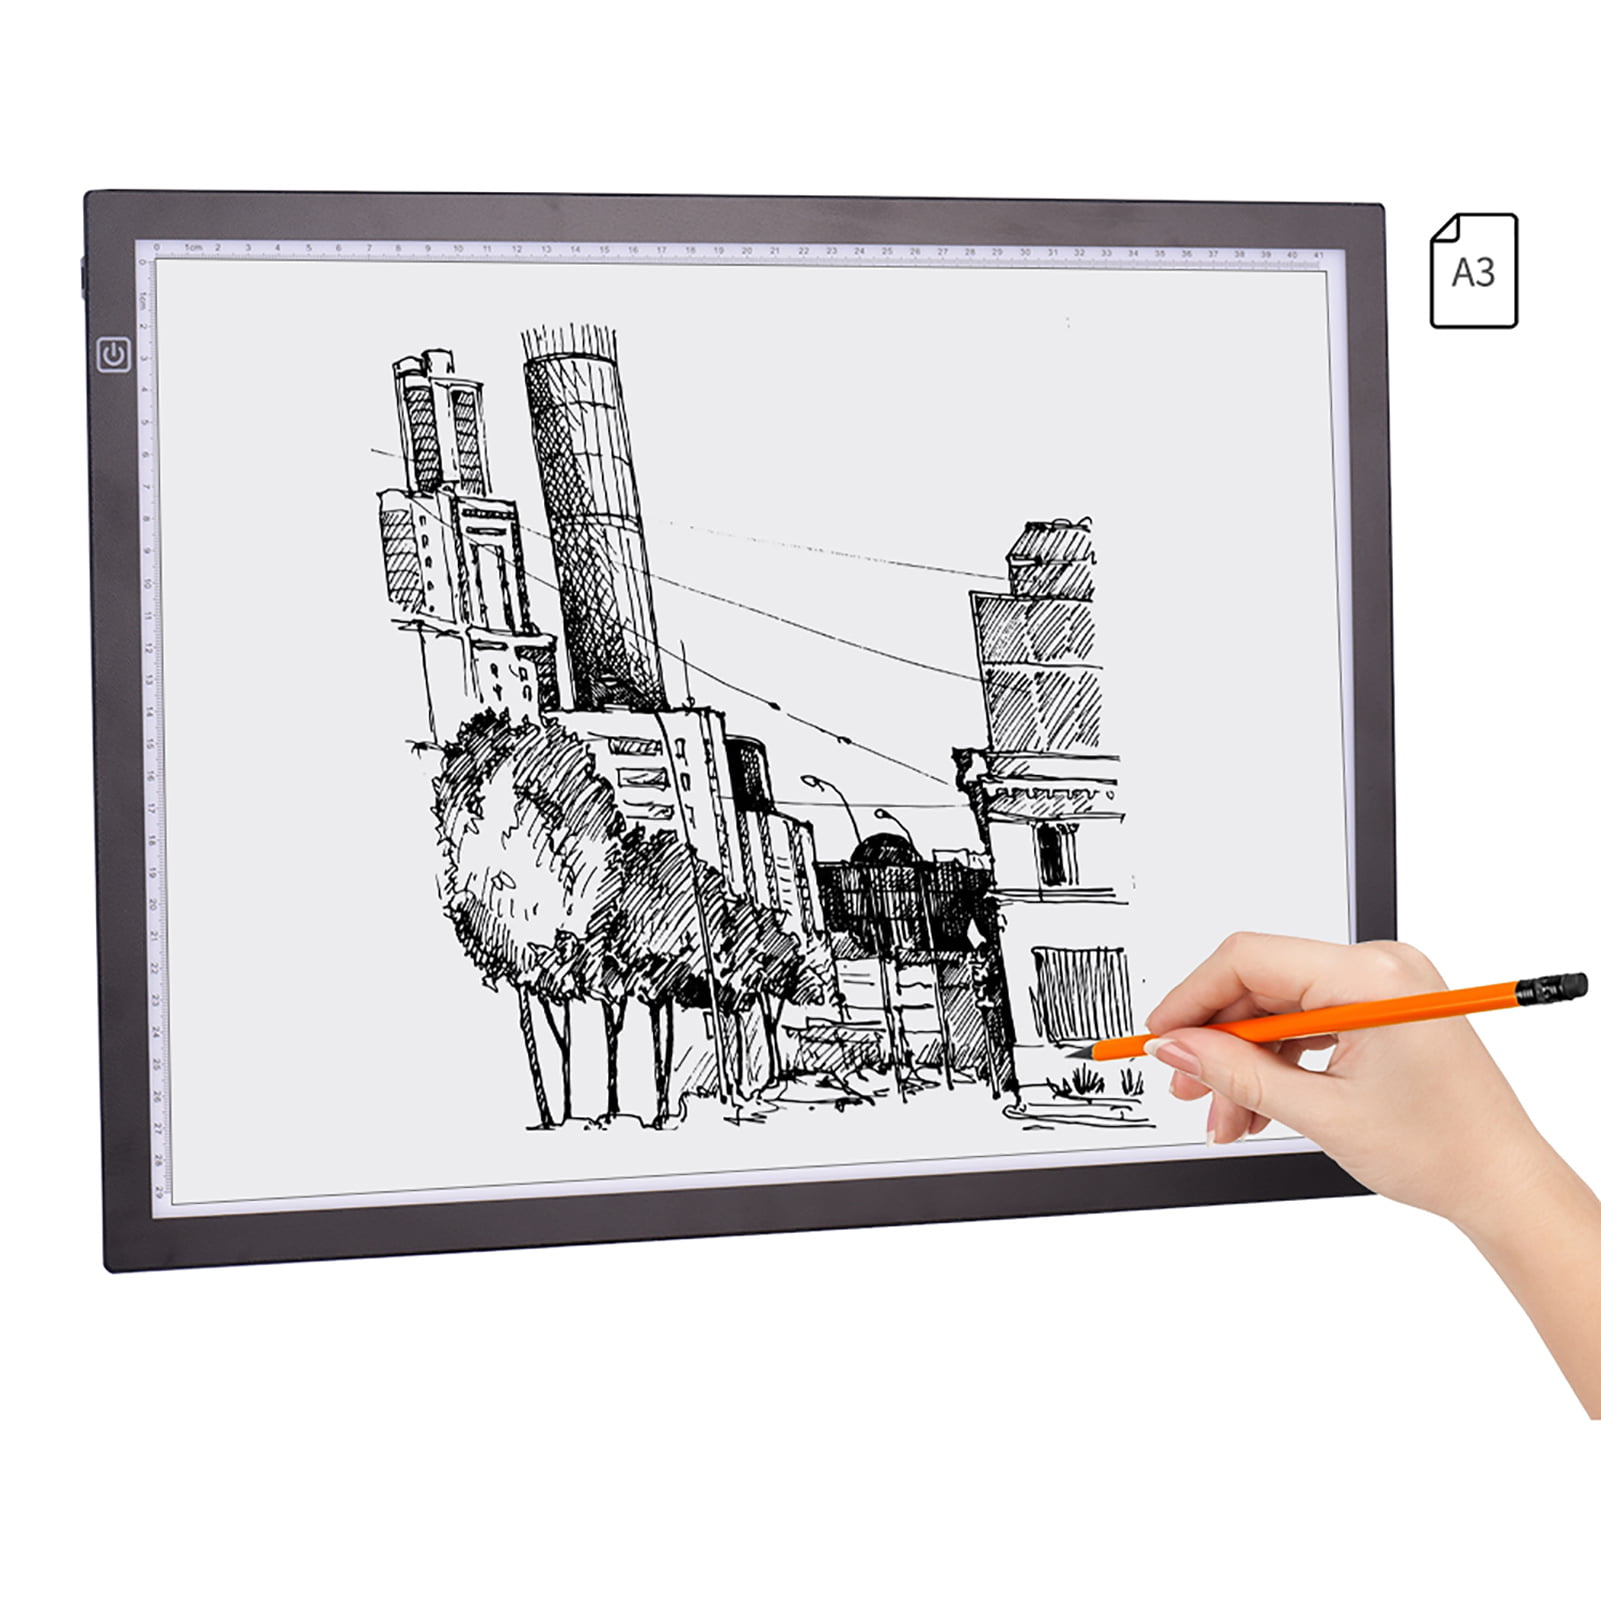 Aibecy Magnetic A4 LED Tracing Light Box Ultra-Thin Stepless Dimmable Brightness Artcraft Light Table Pad Board Portable Copy Board Sketching Drawing Tracing Animation Designing X-ray 